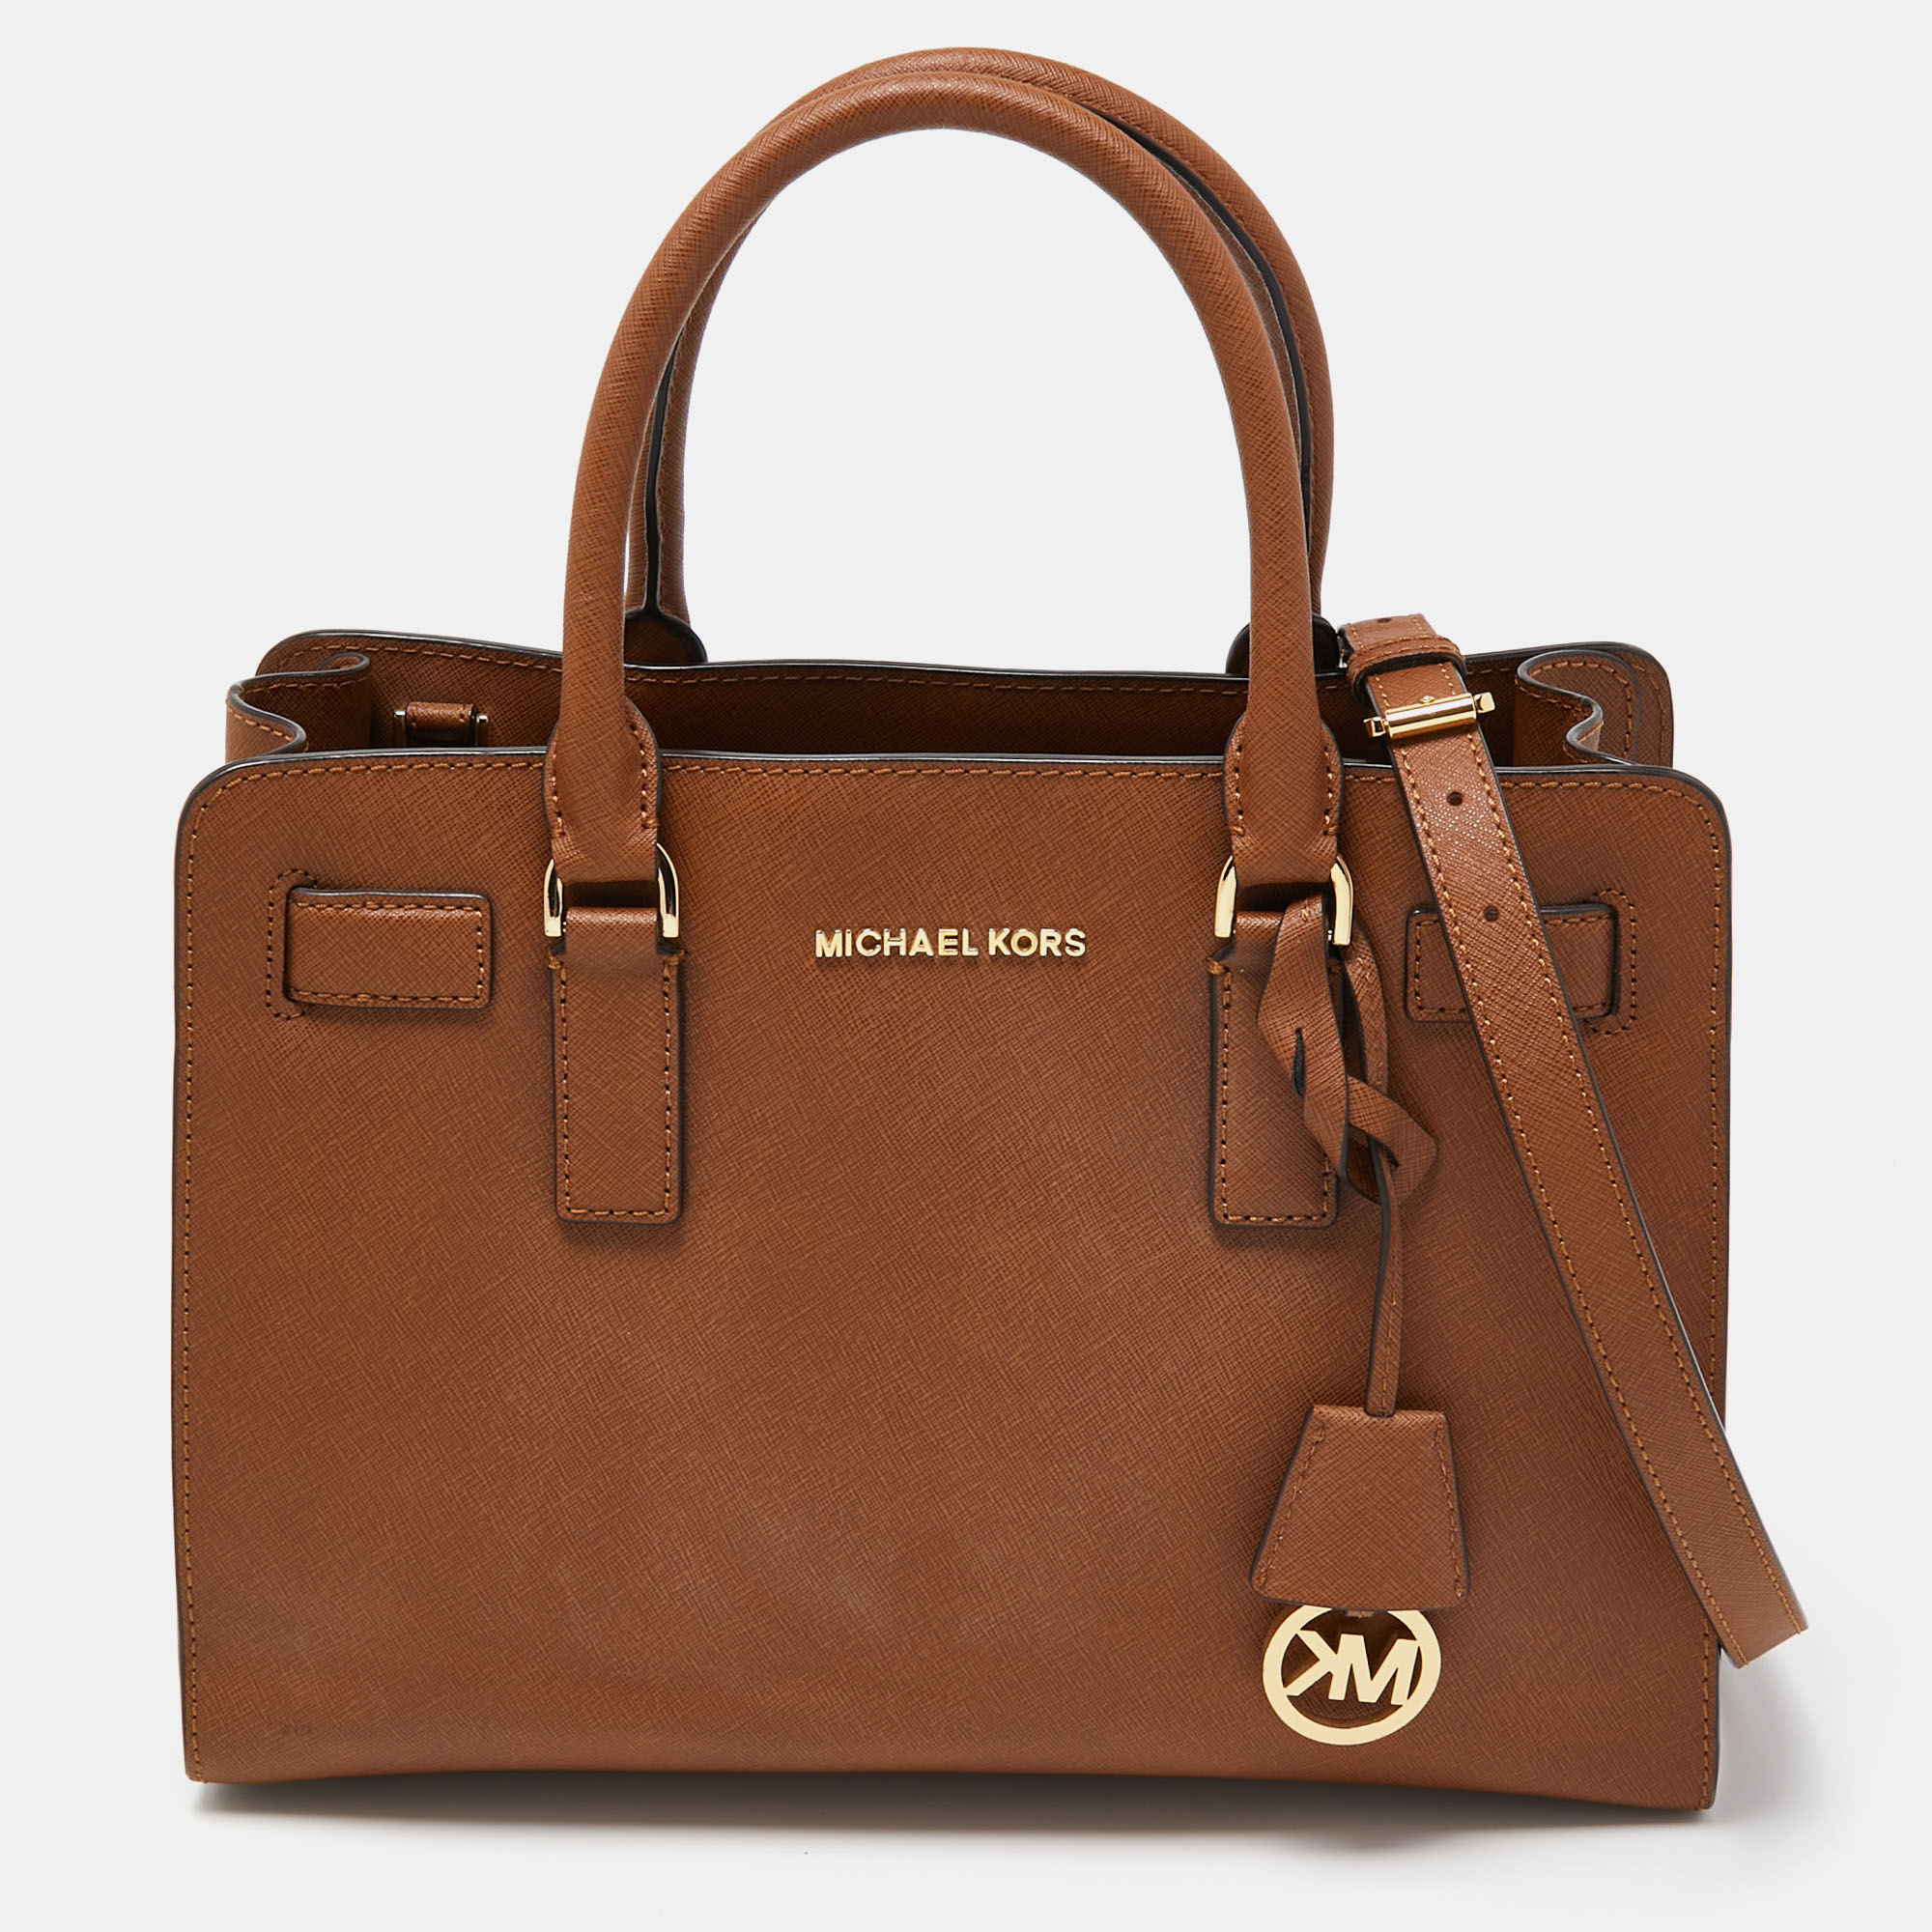 

Michael Kors Brown Saffiano Leather Medium East West Dillon Tote